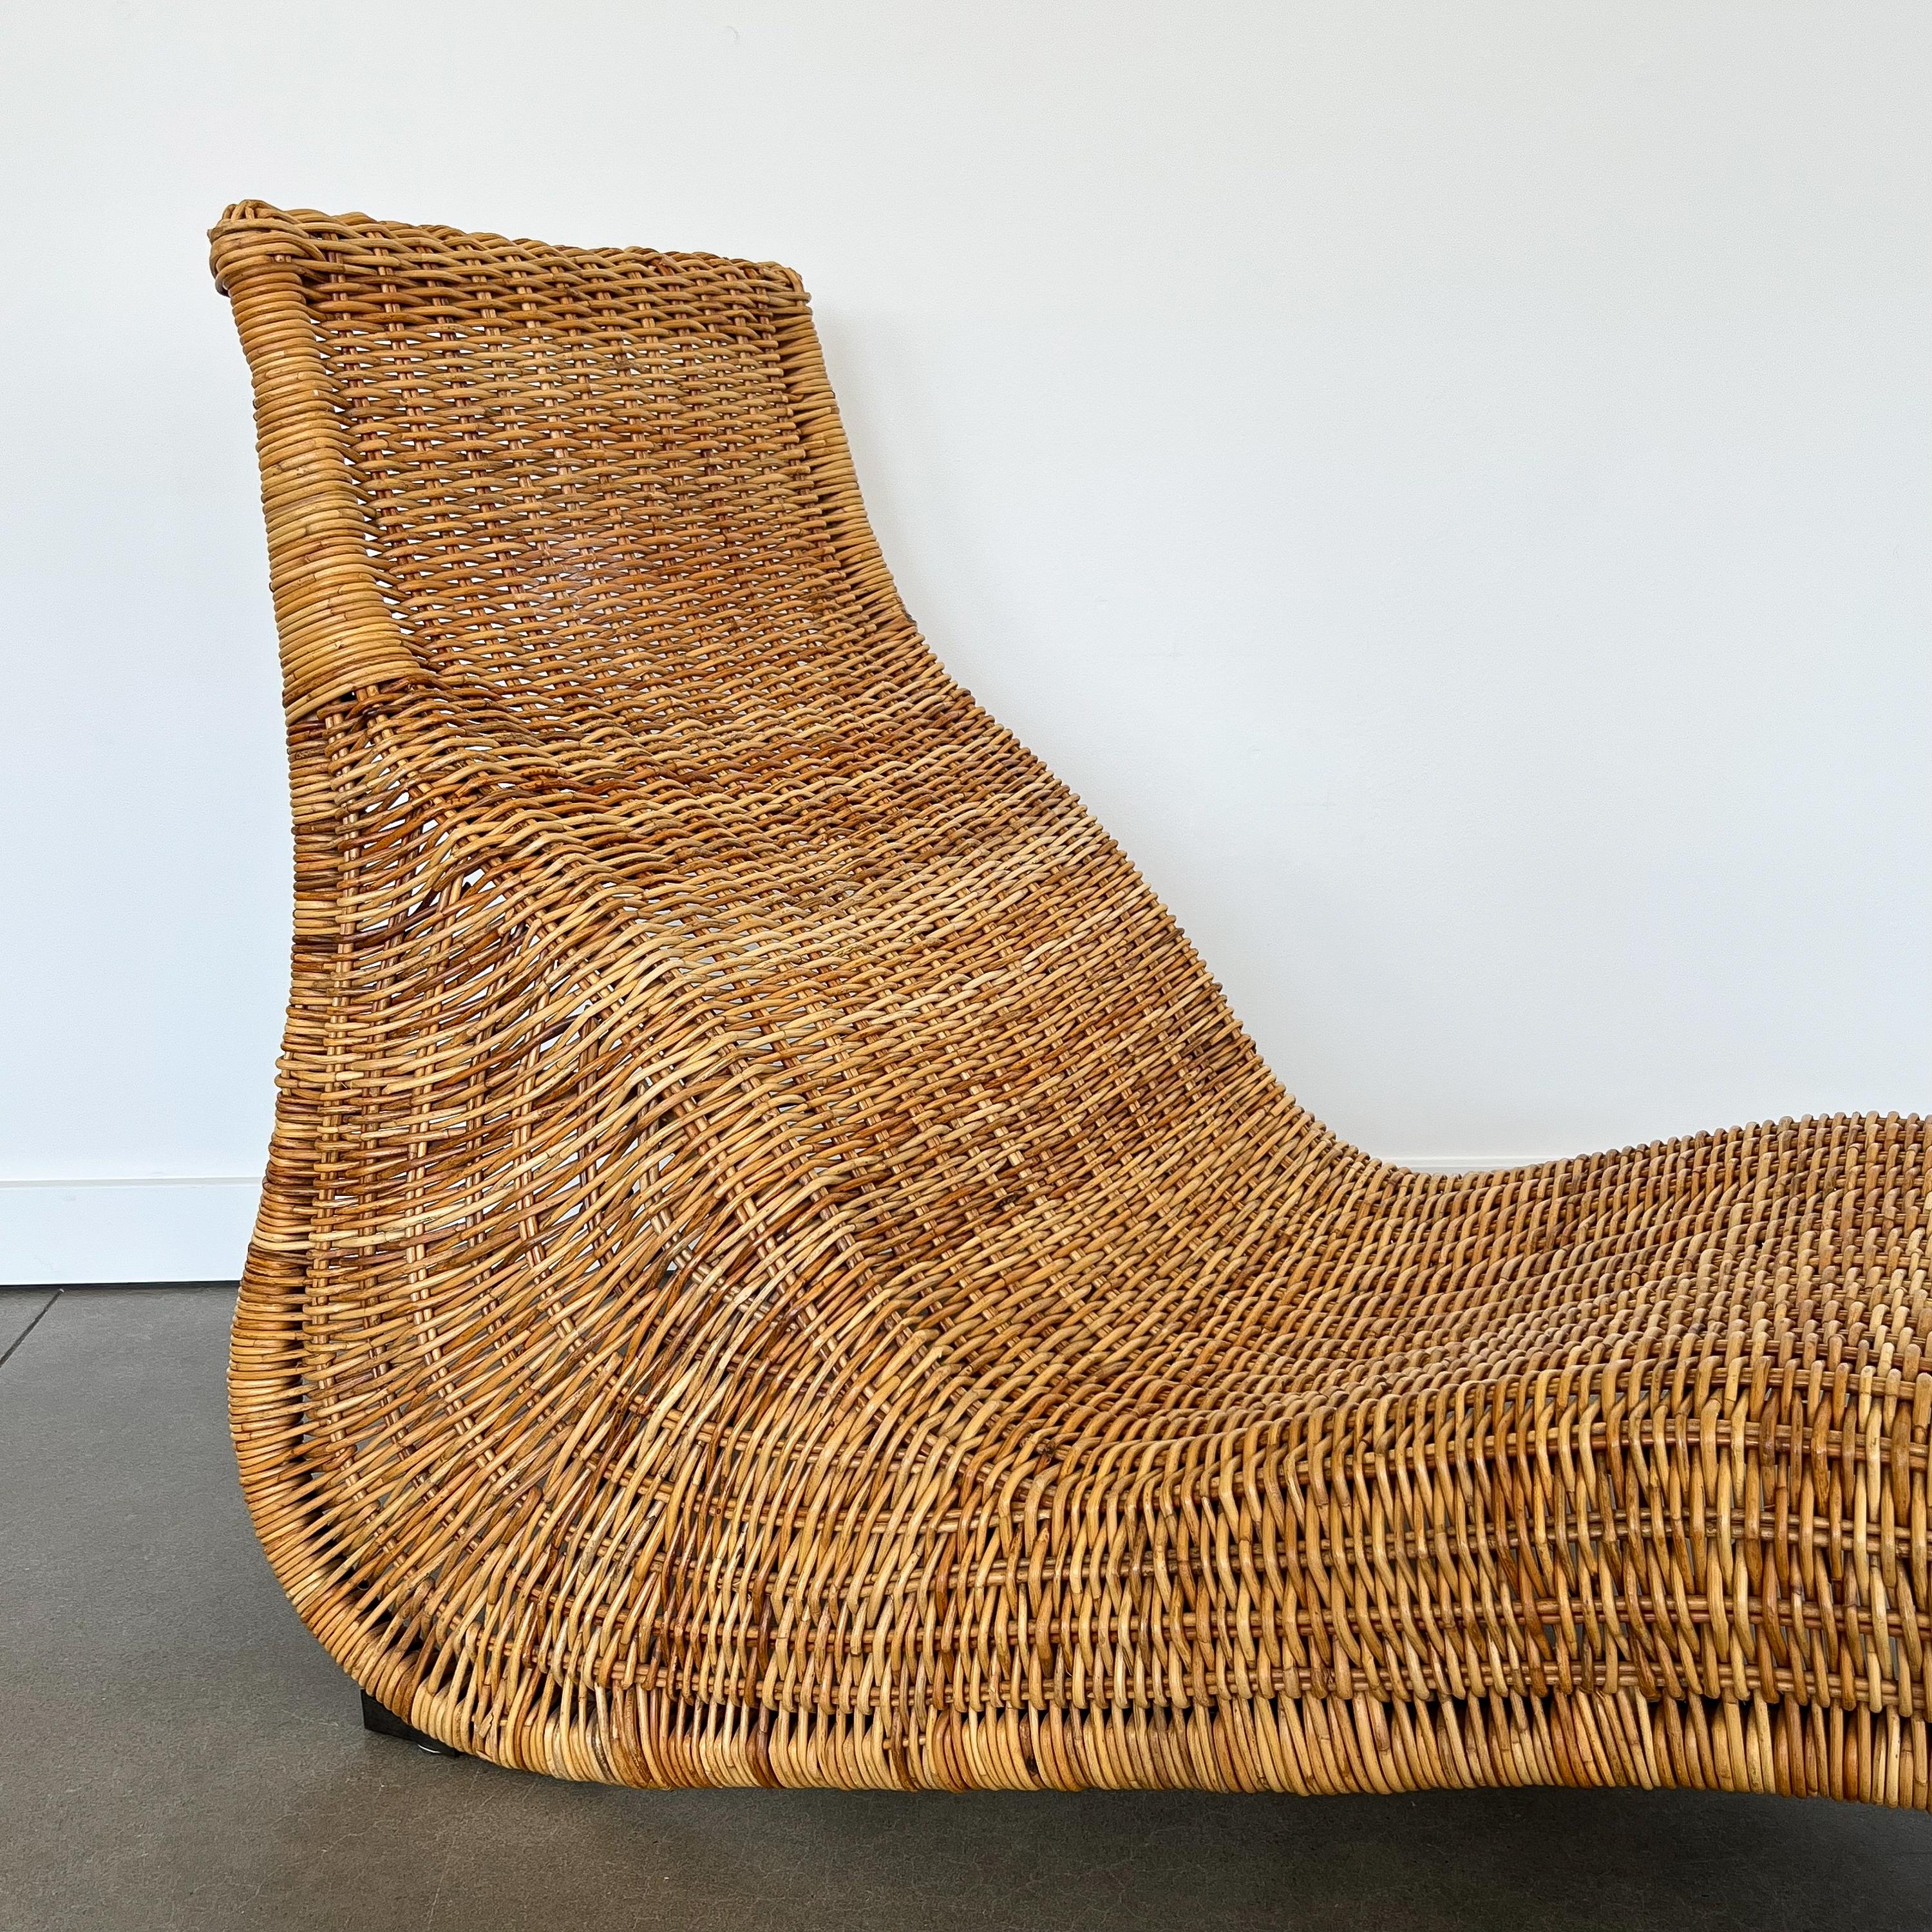 Karlskrona Rattan Wicker Chaise Lounge by Karl Malmvall for Ikea 5